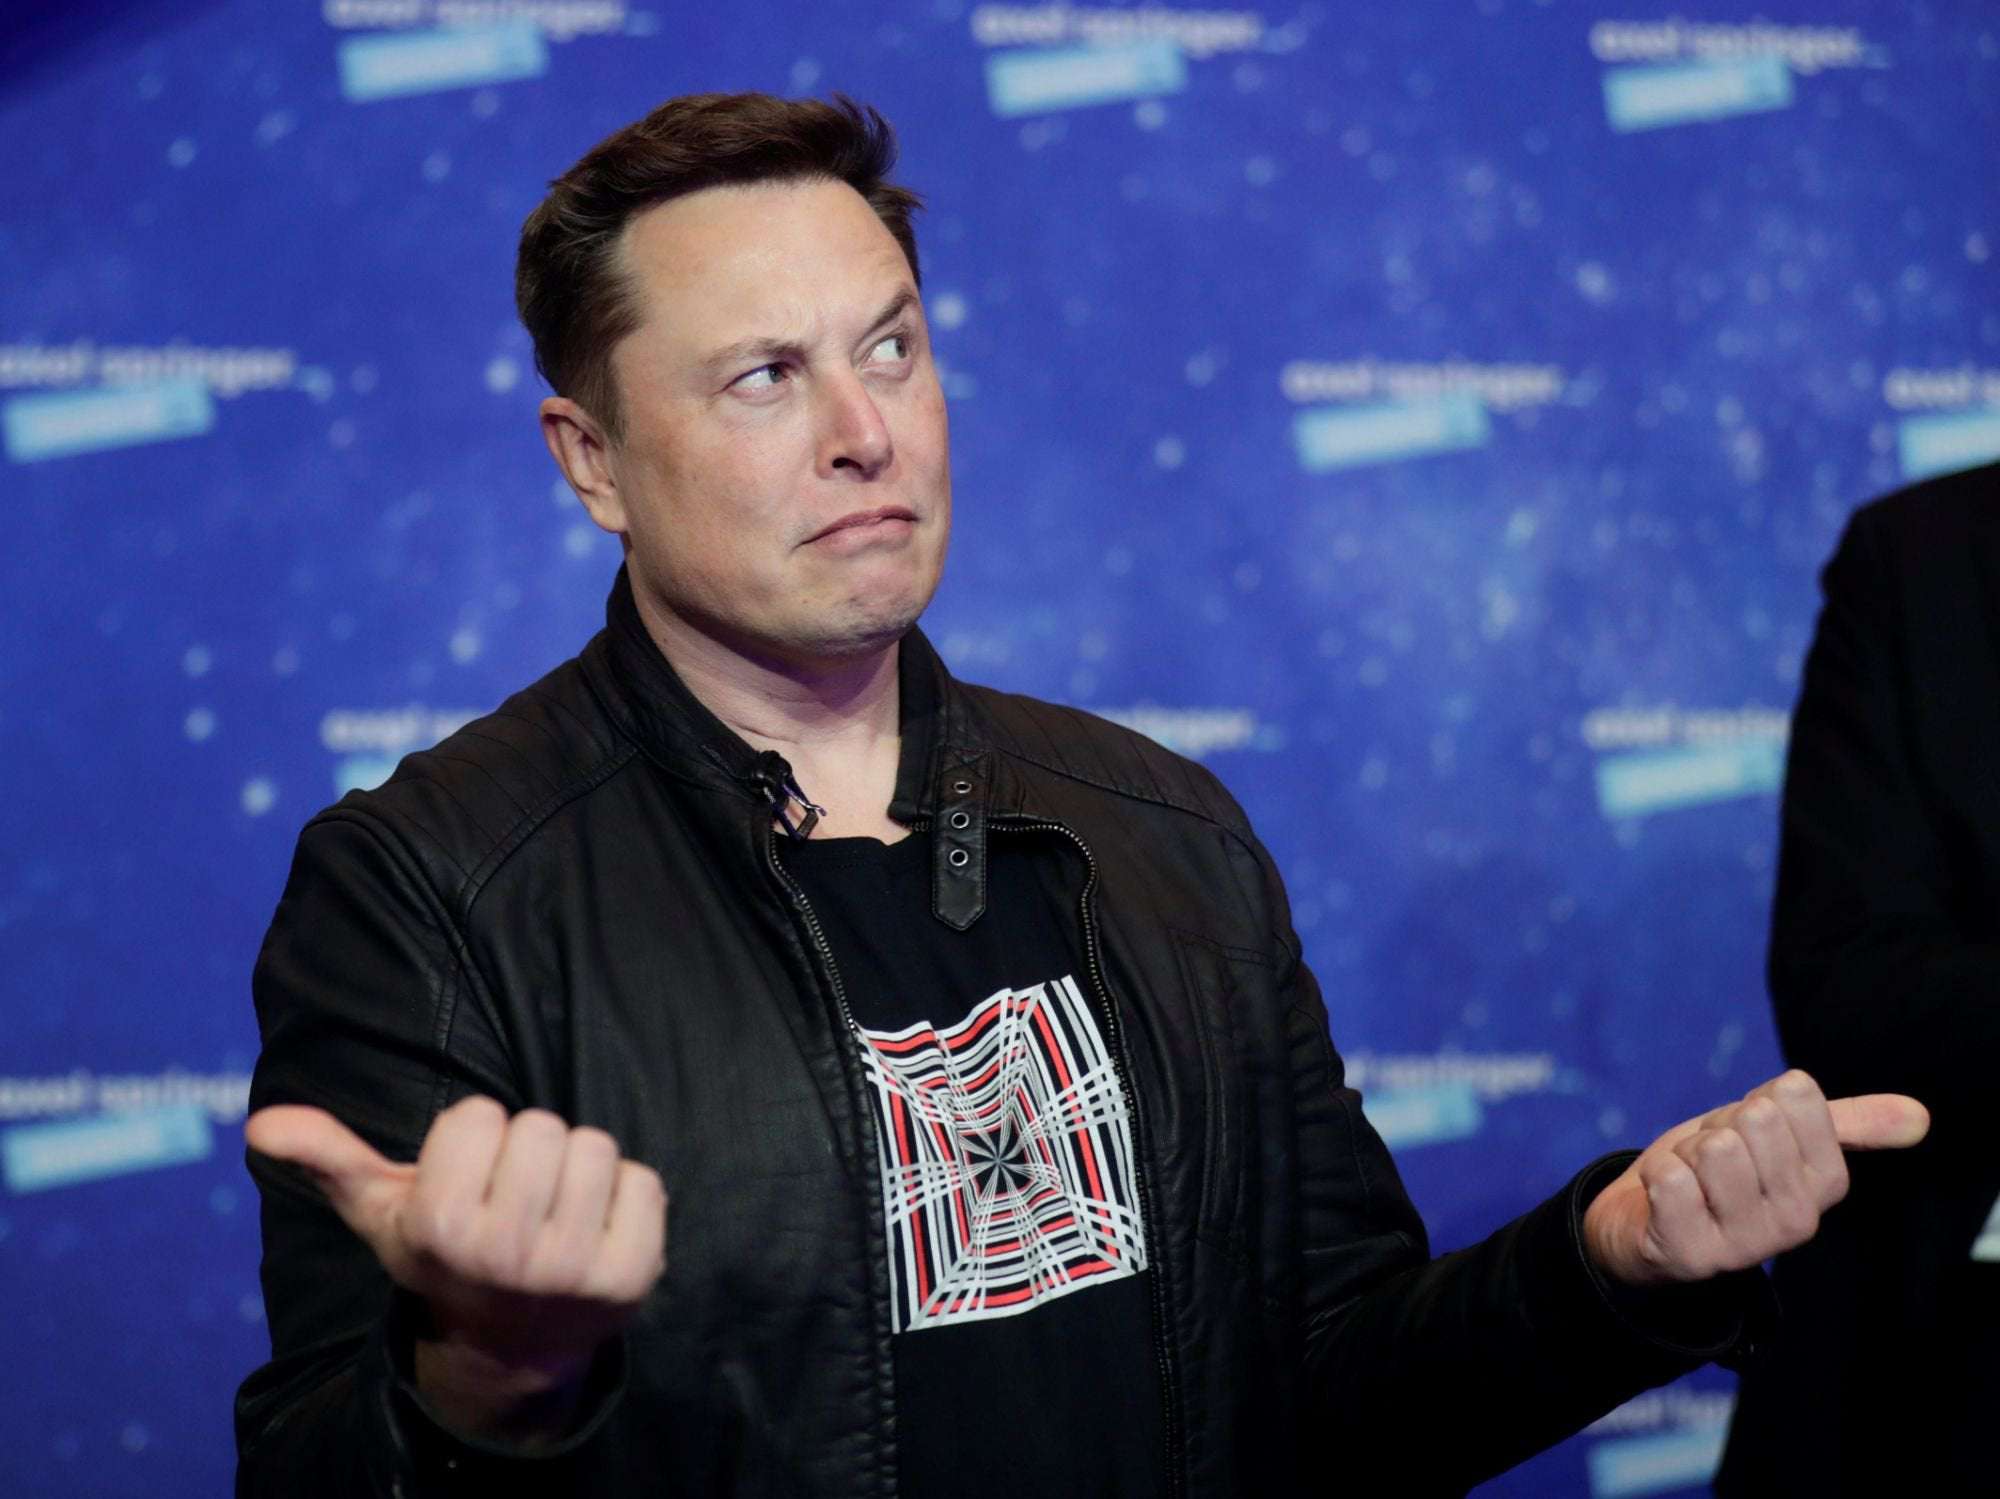 image for Russia may fine citizens for using SpaceX's Starlink internet. Here's how Elon Musk's service poses a threat to authoritarian regimes.